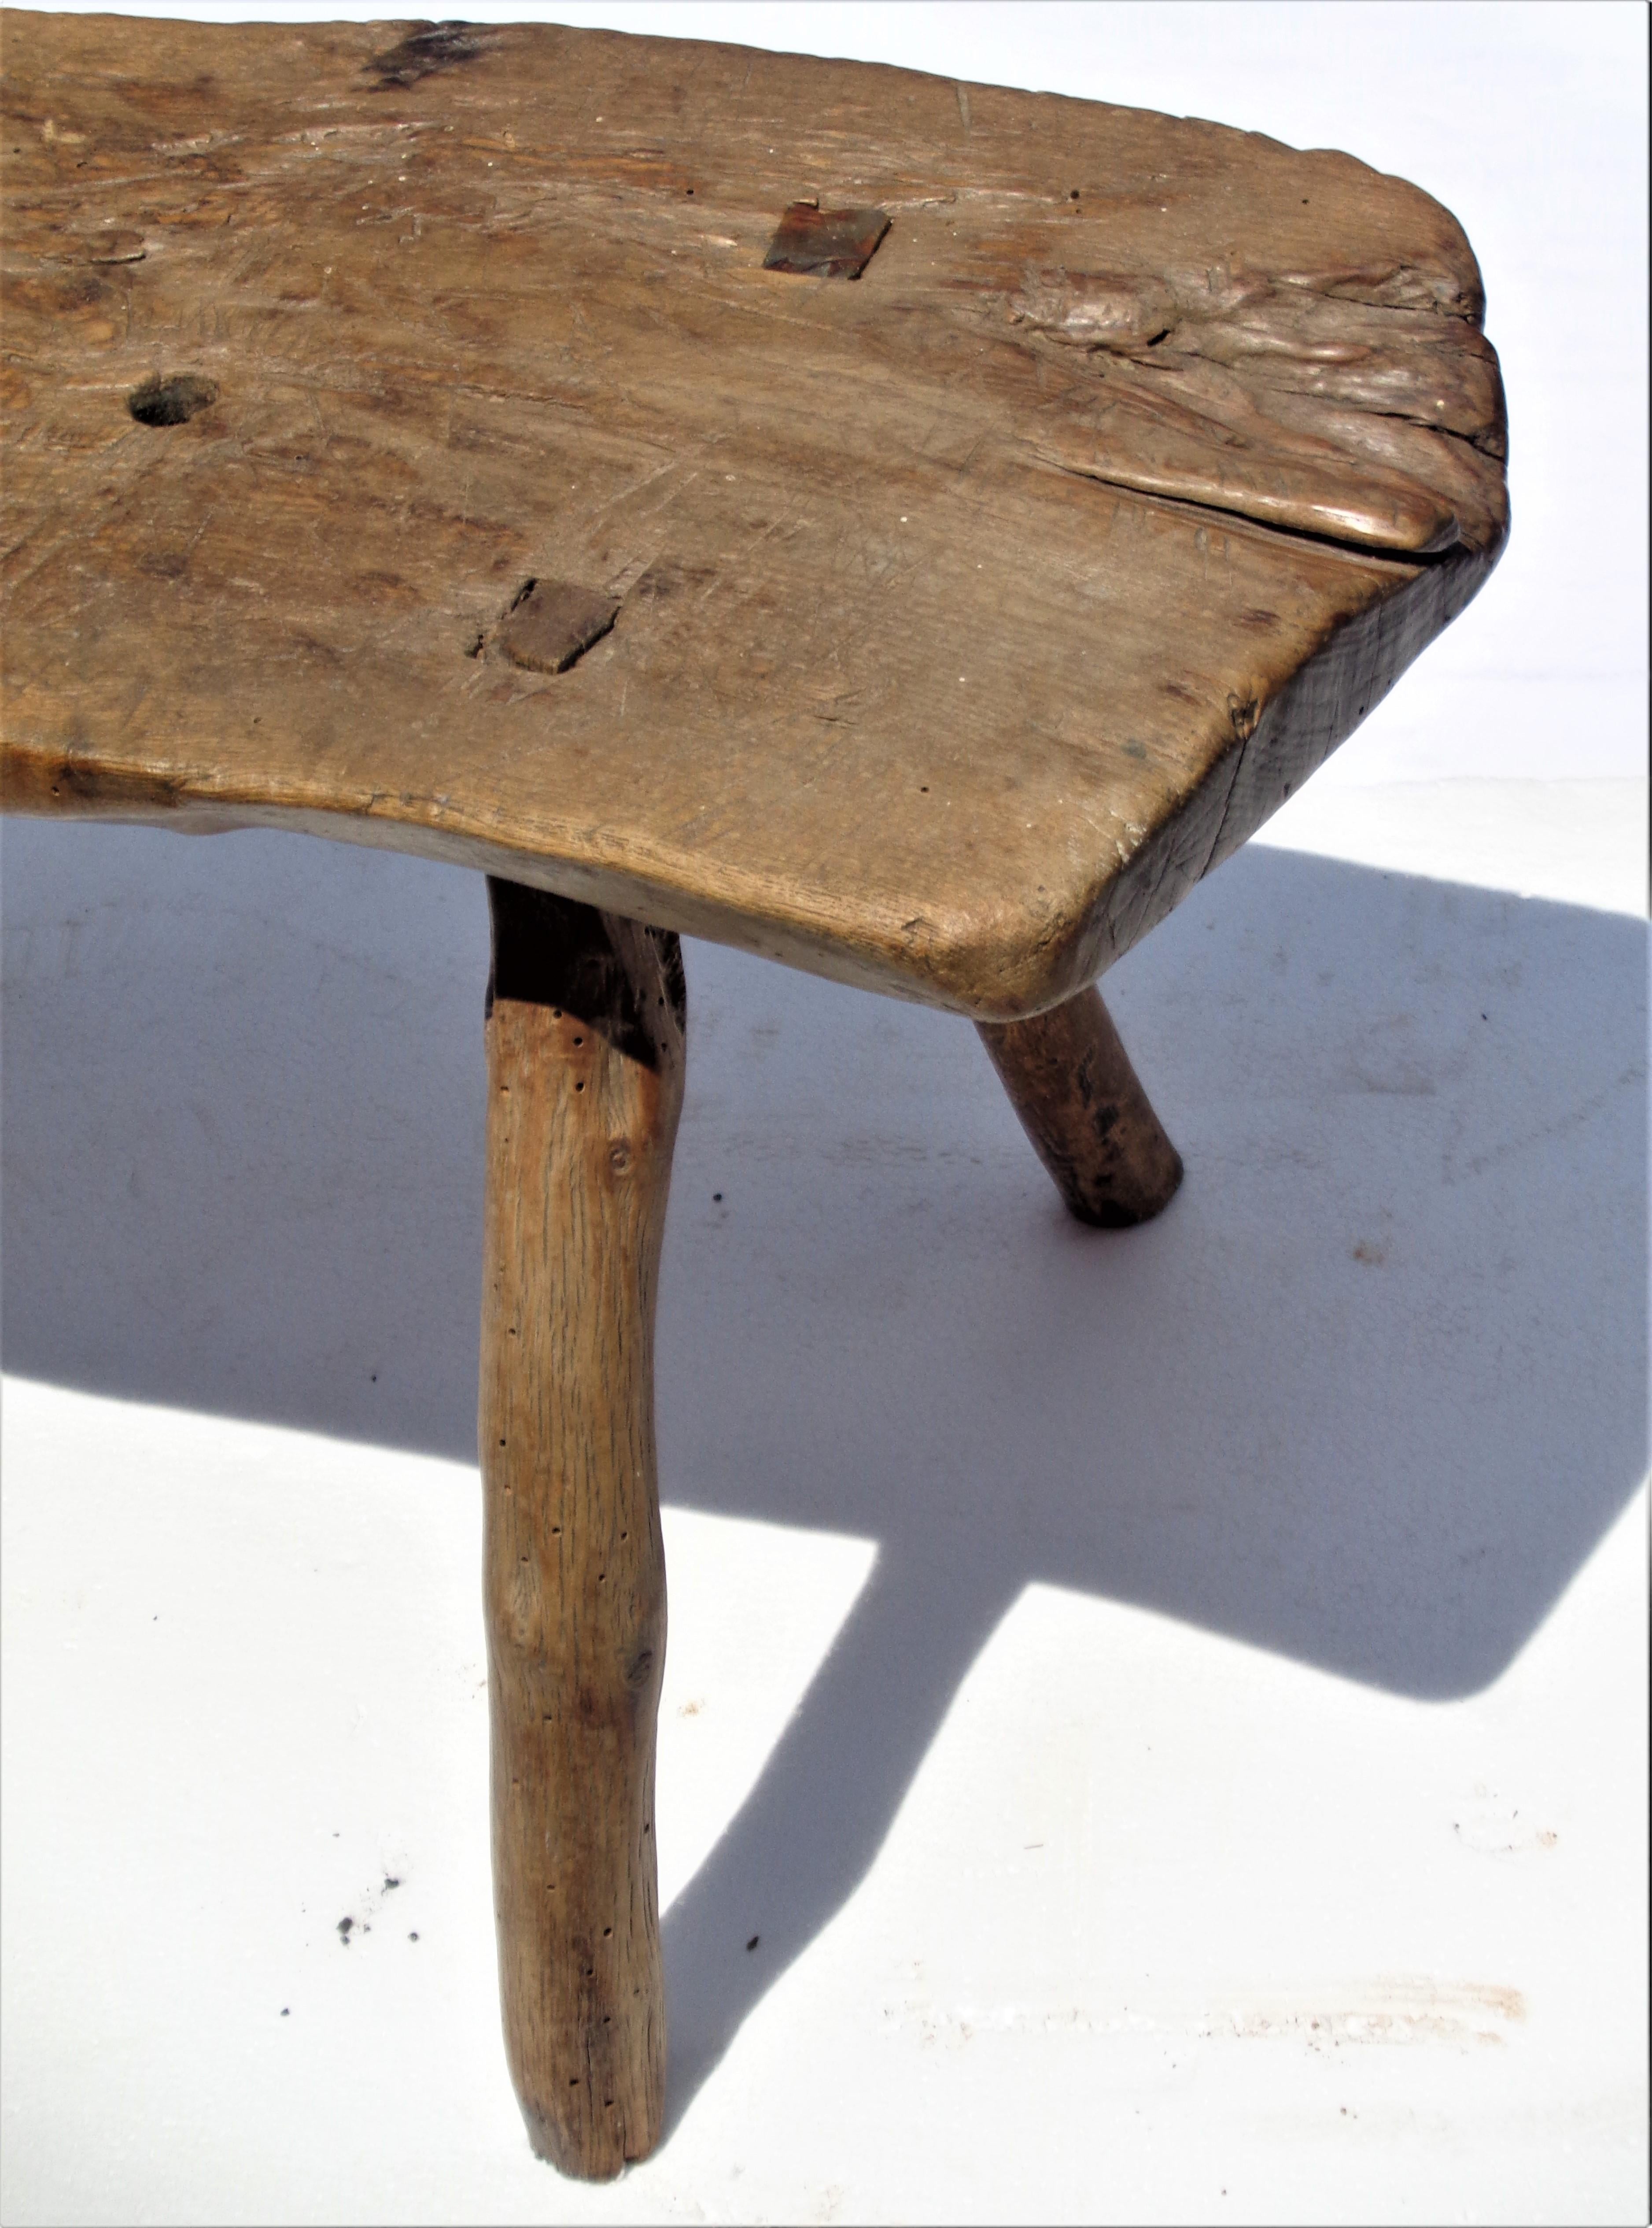 Antique American country primitive three legged work stool with early pegged through construction in original beautifully aged natural color. The thick free form tree wood slab top with genuine wear from well over a hundred years of actual use